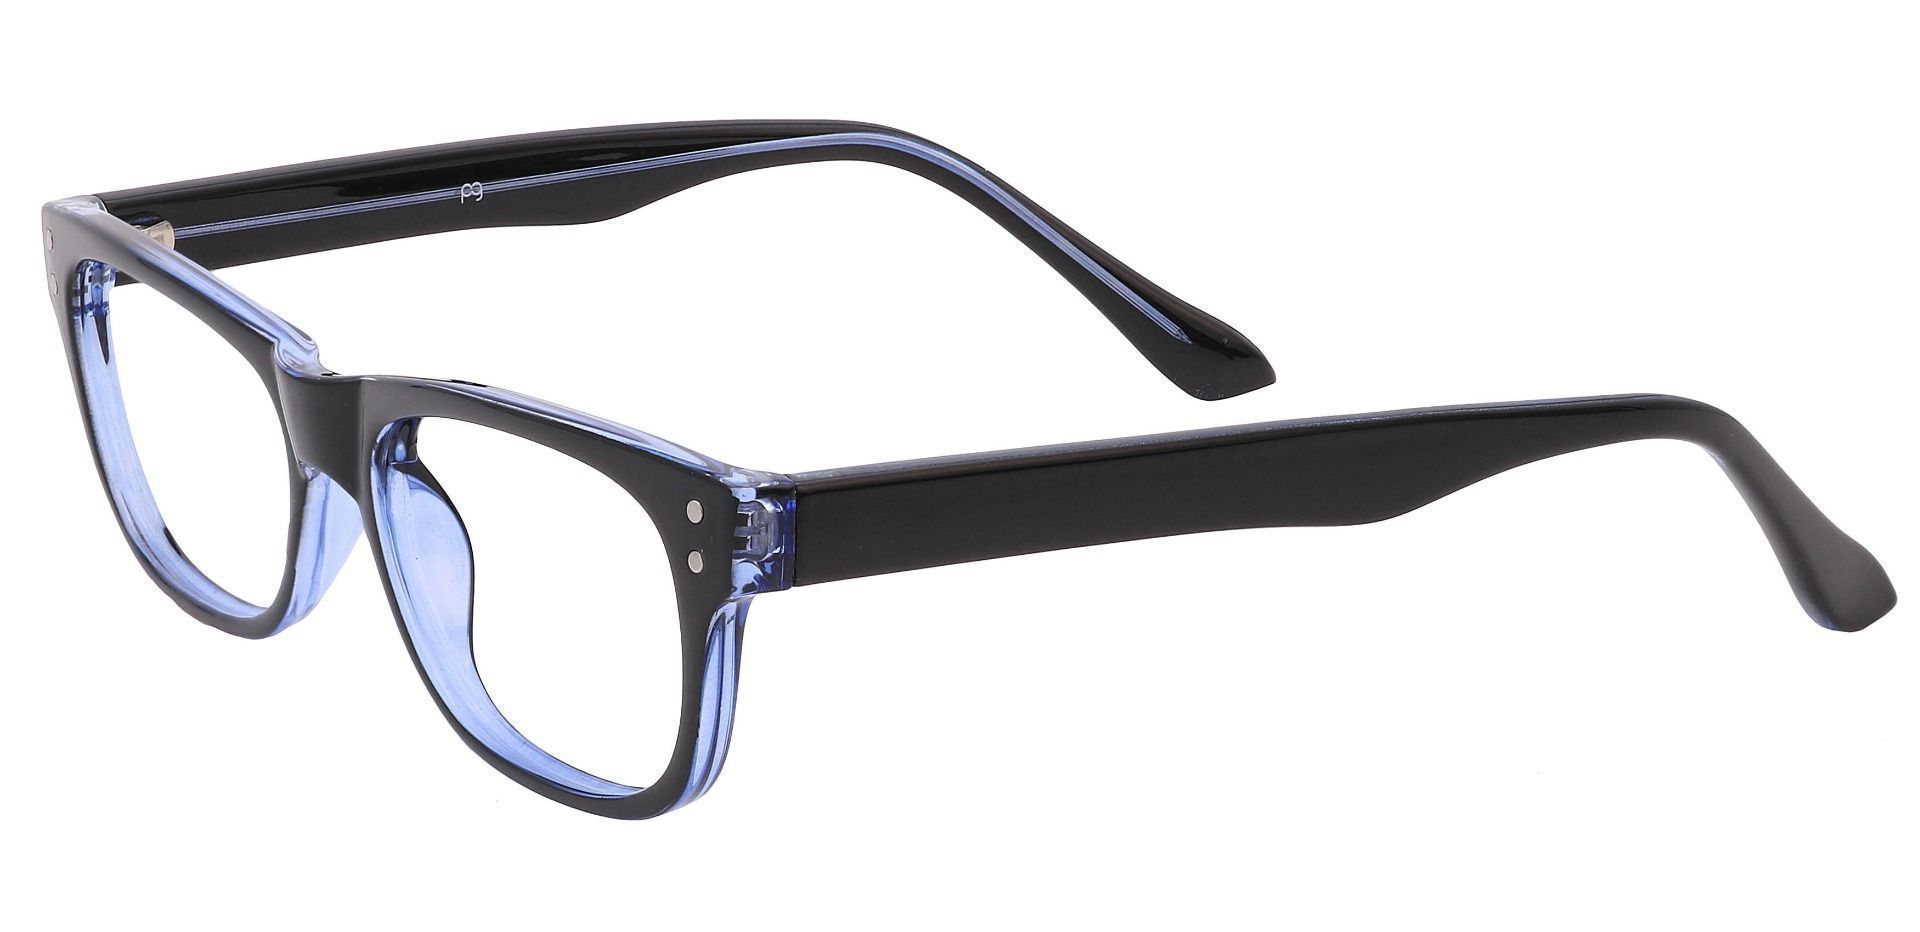 Murphy Rectangle Eyeglasses Frame - The Frame Is Blue And Black